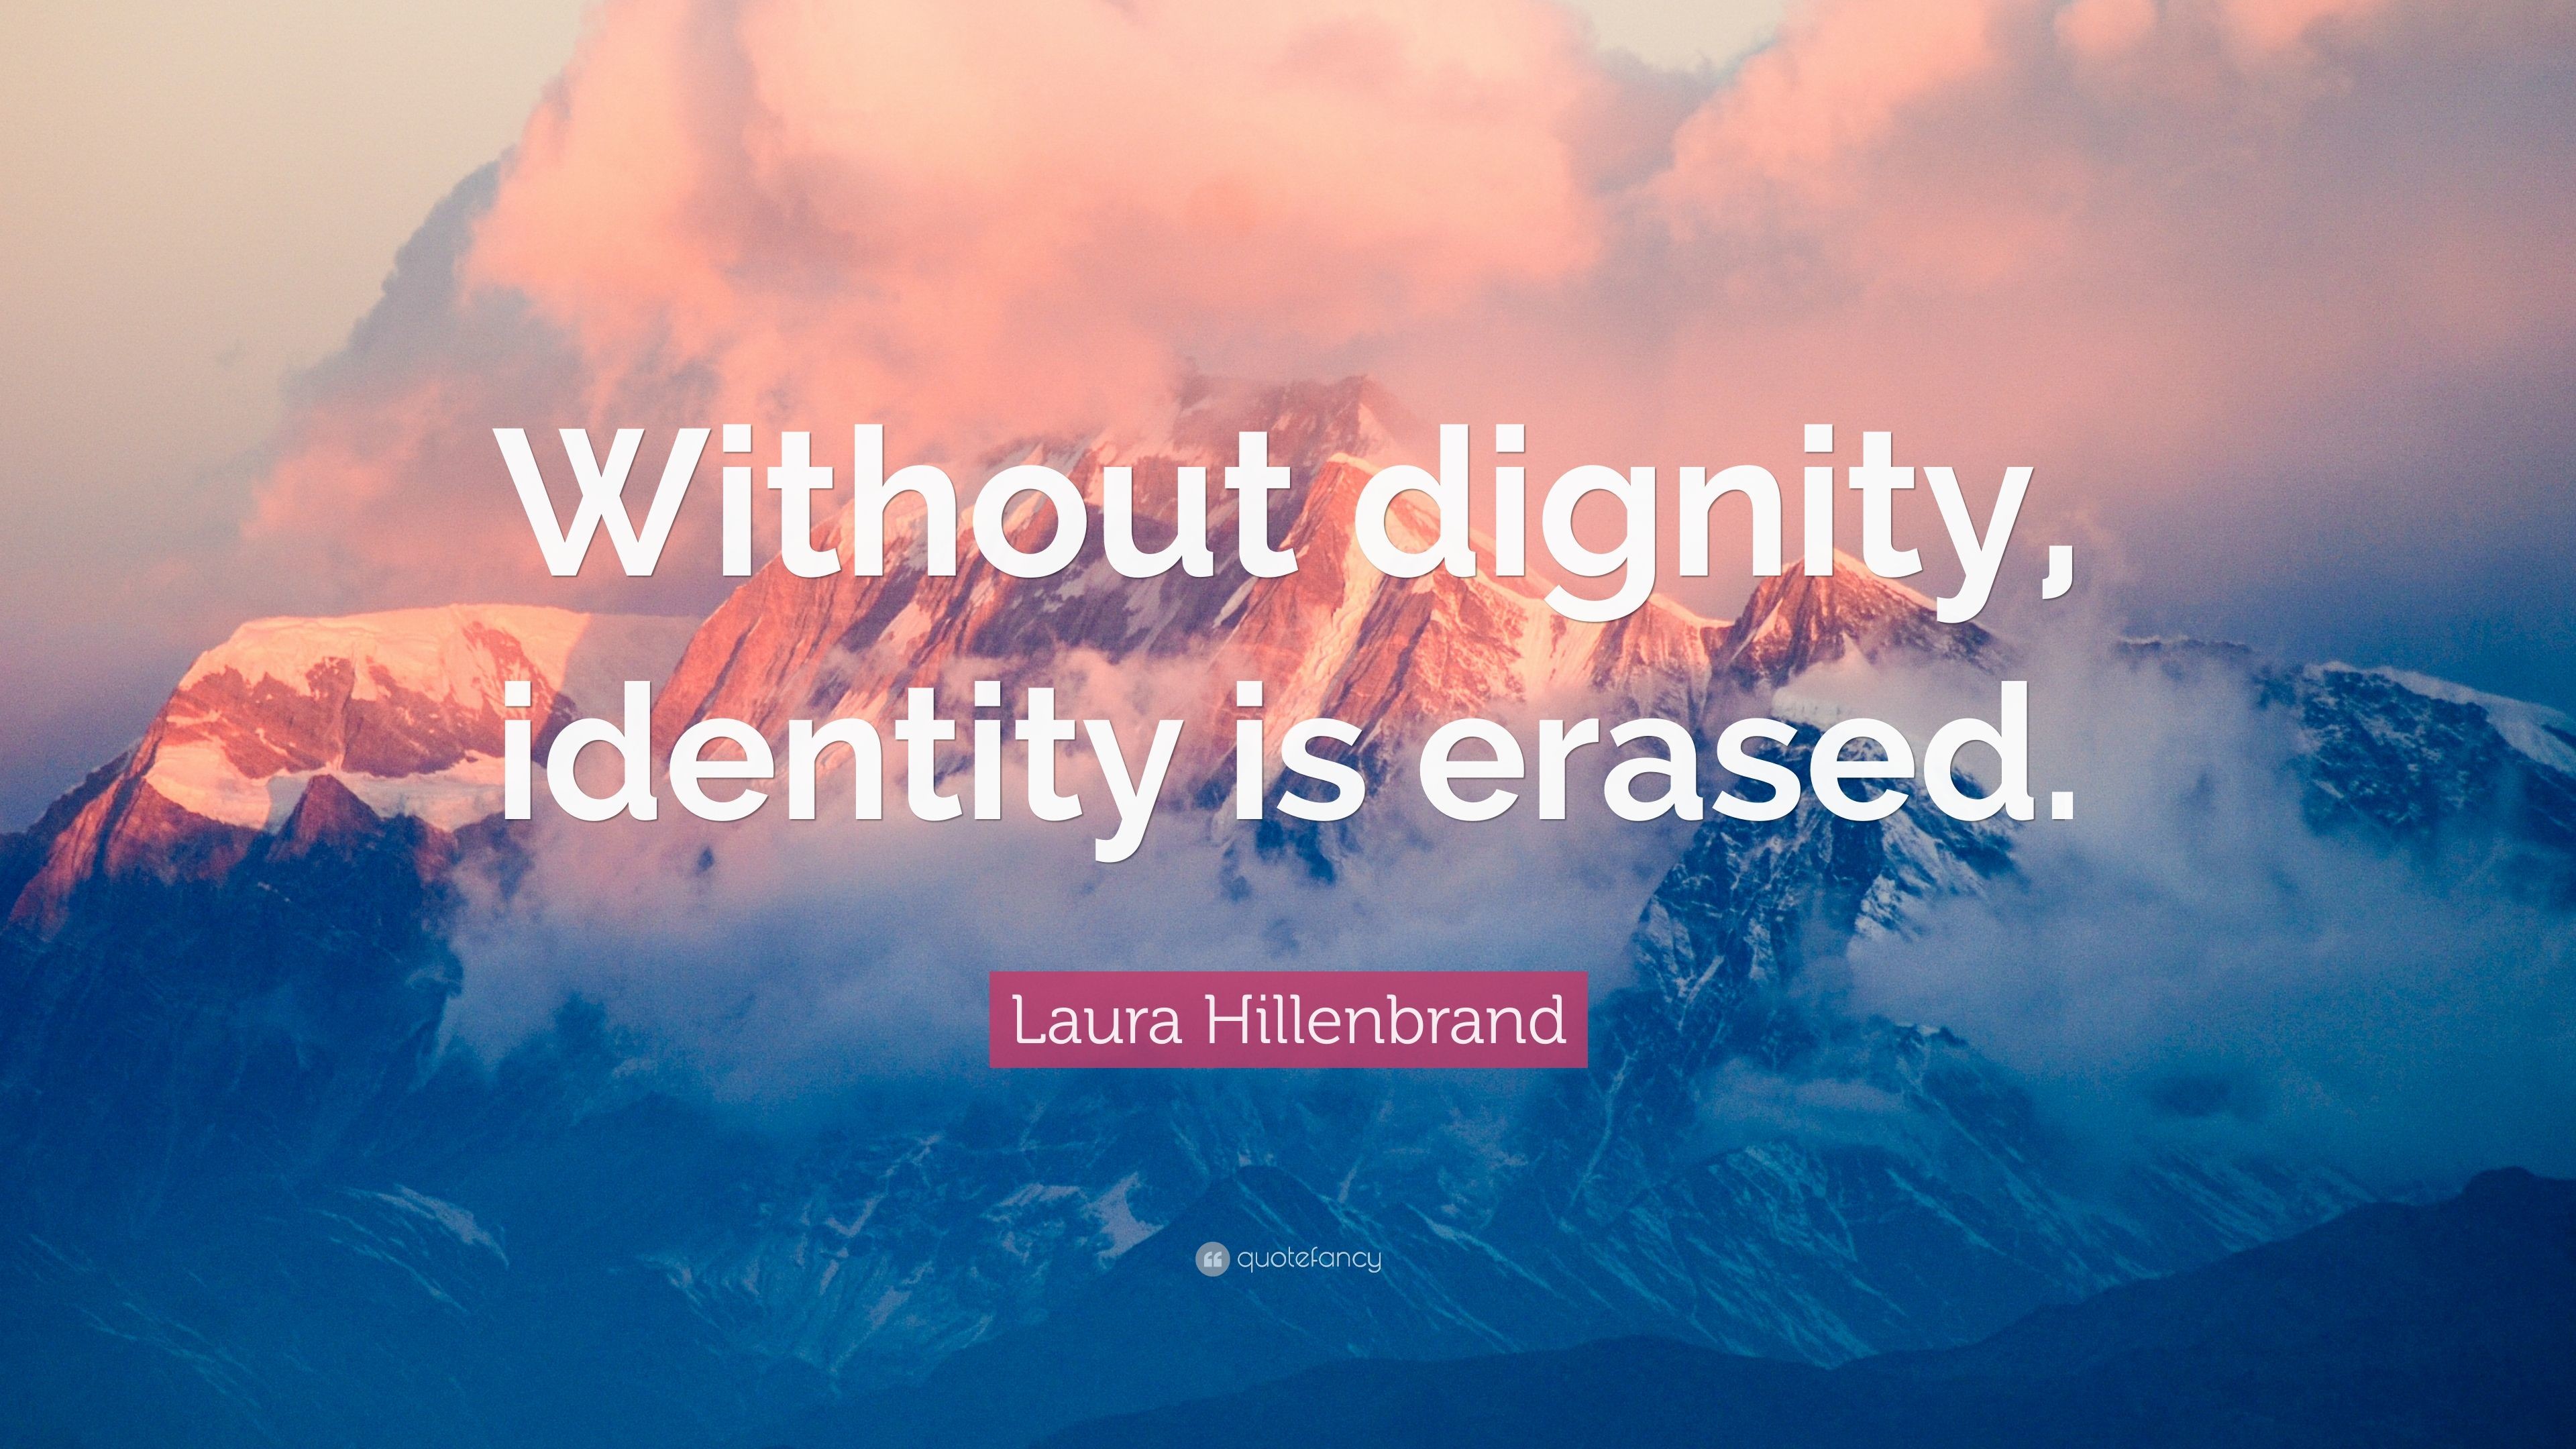 3840x2160 Laura Hillenbrand Quote: “Without dignity, identity is erased.”